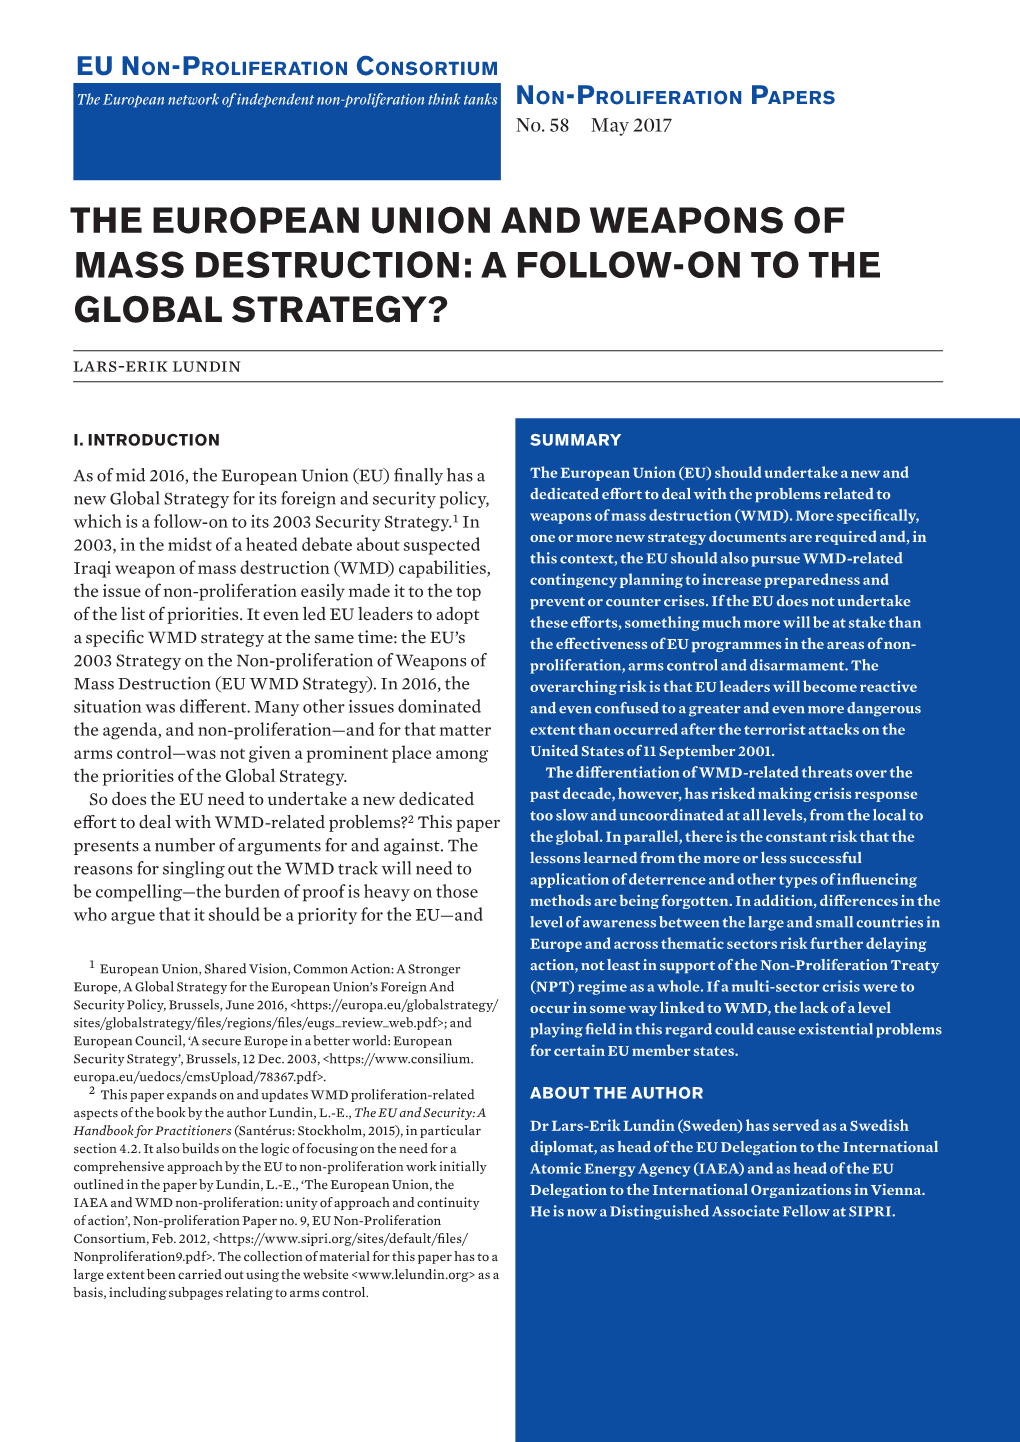 The European Union and Weapons of Mass Destruction: a Follow-On to the Global Strategy?